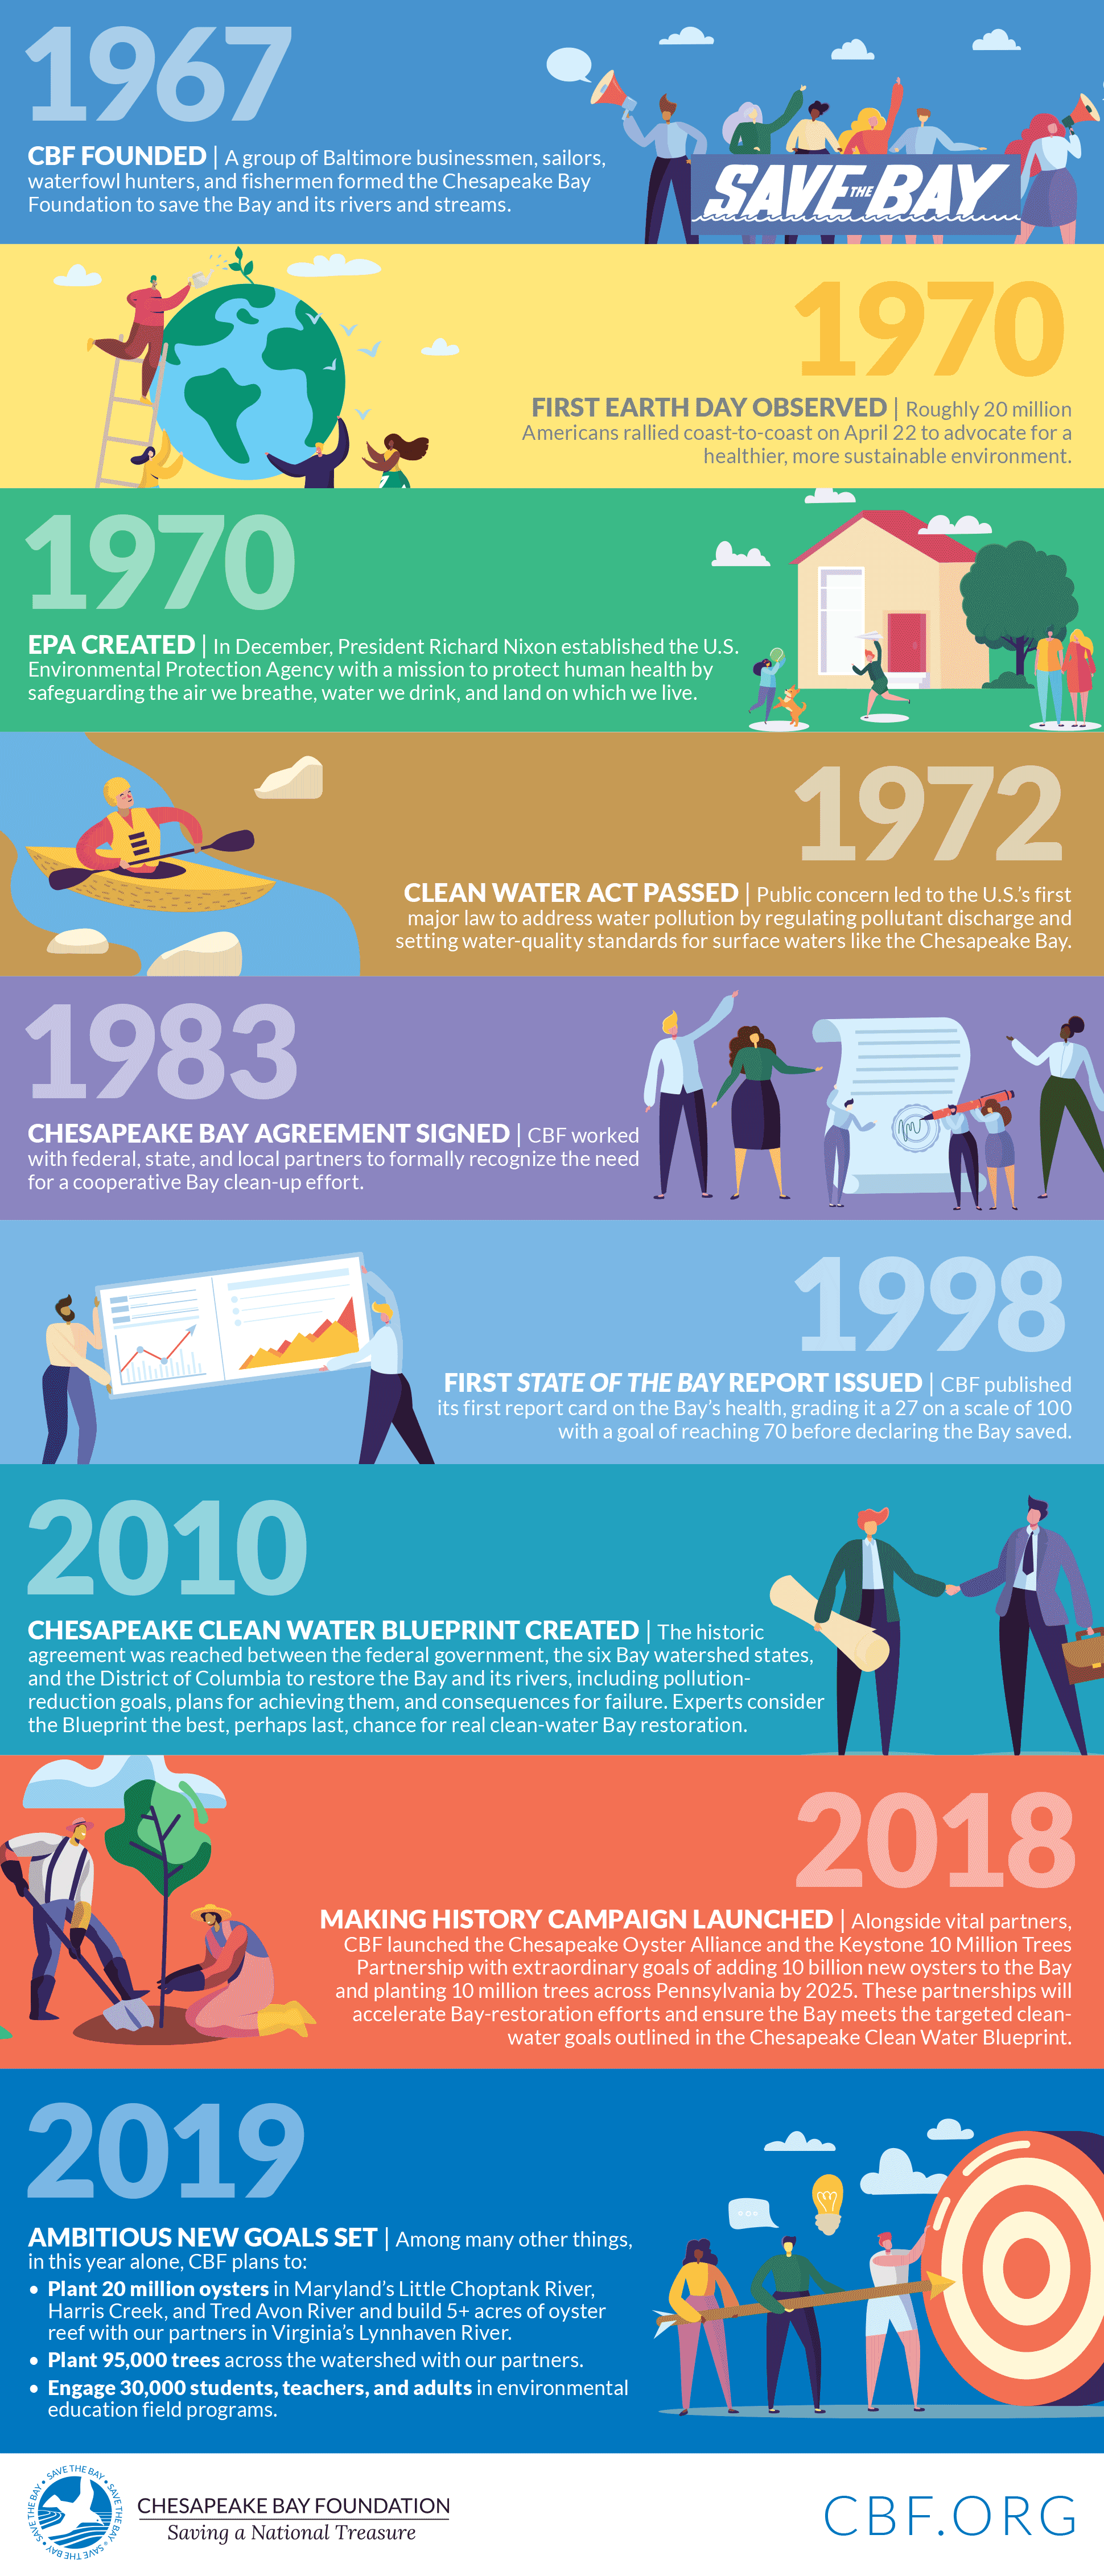 Timeline from 1967 to 2019 showing key dates in conservation (and CBF) history for the Chesapeake Bay.